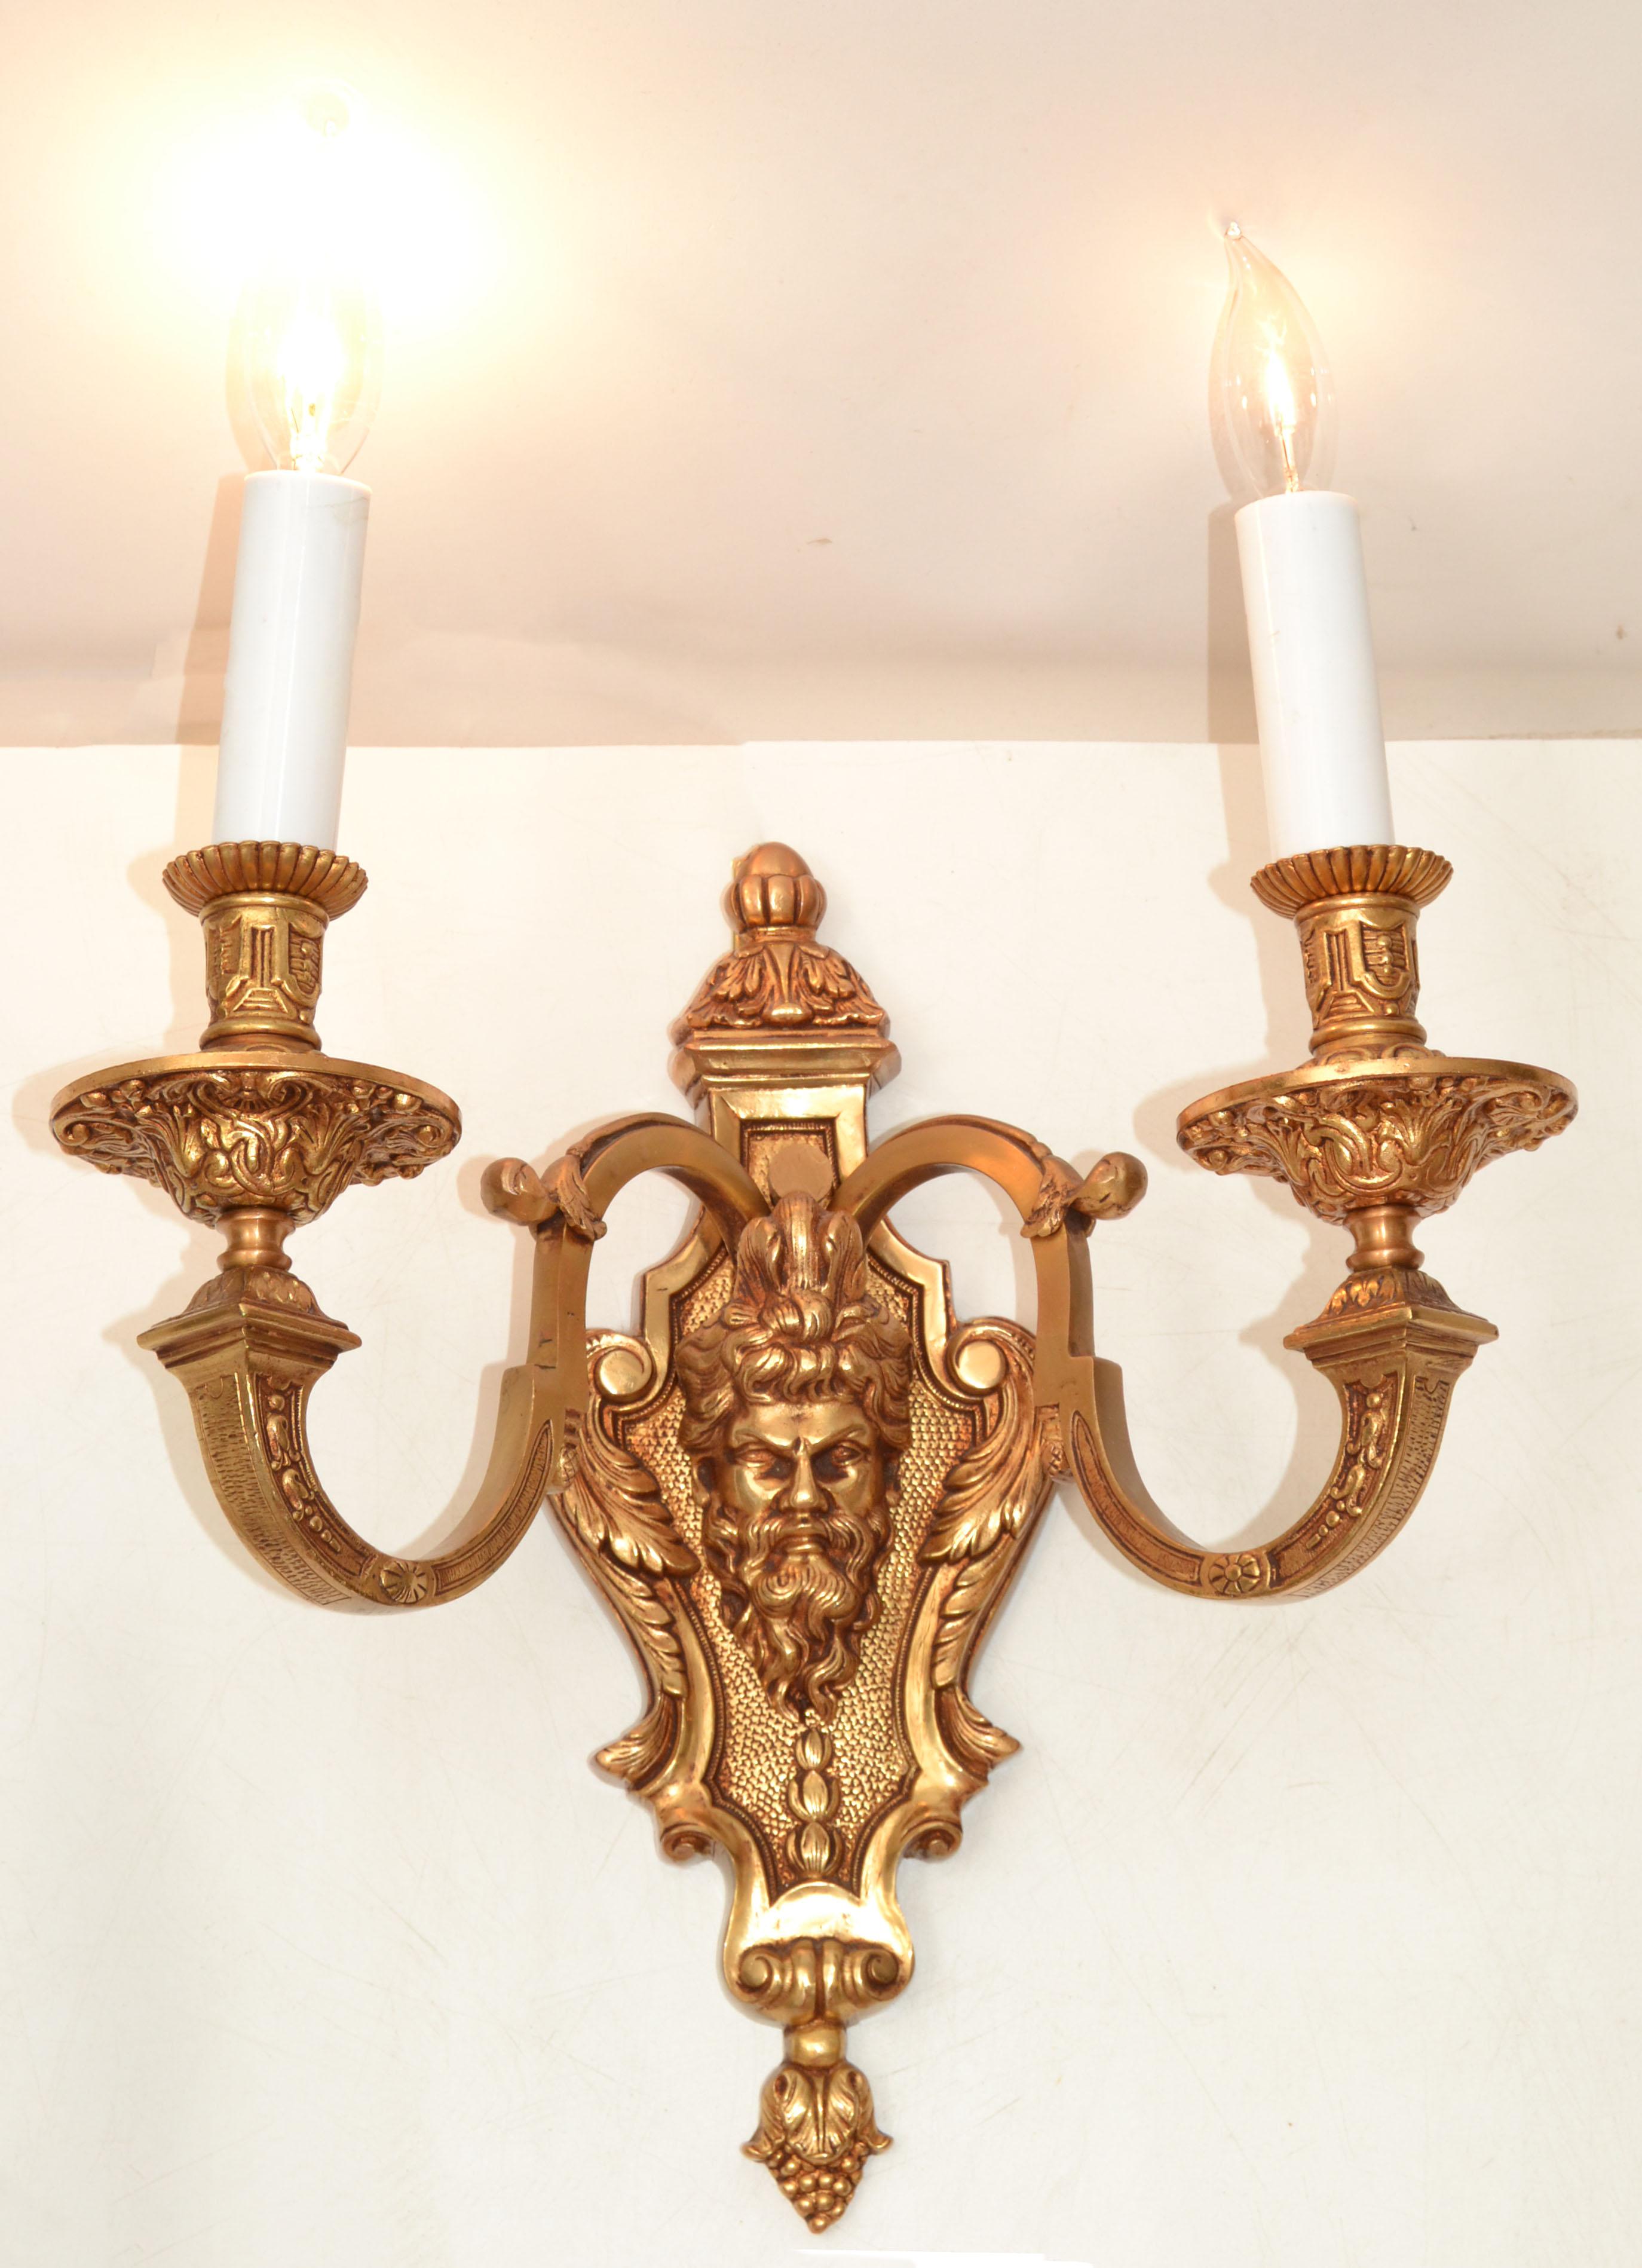 Pair of Second Empire Heavy 2 Light Bronze Sconces Wall Lights Late 19th Century For Sale 5